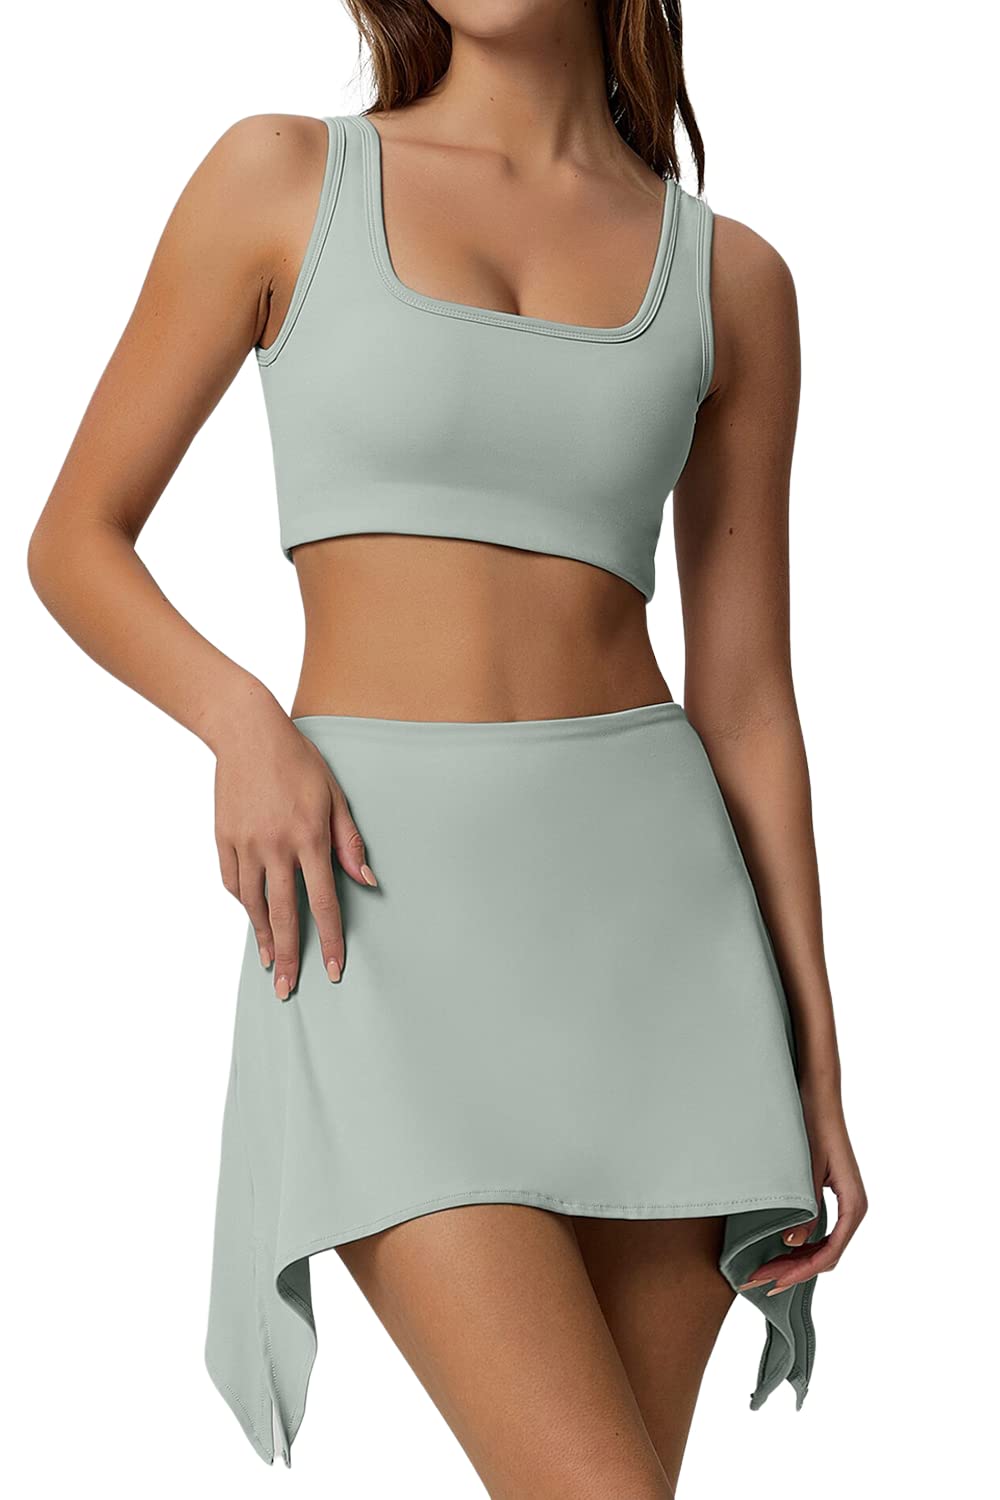 QUYUON Womens Athletic Tank Dresses with Built-in Shorts Clearance